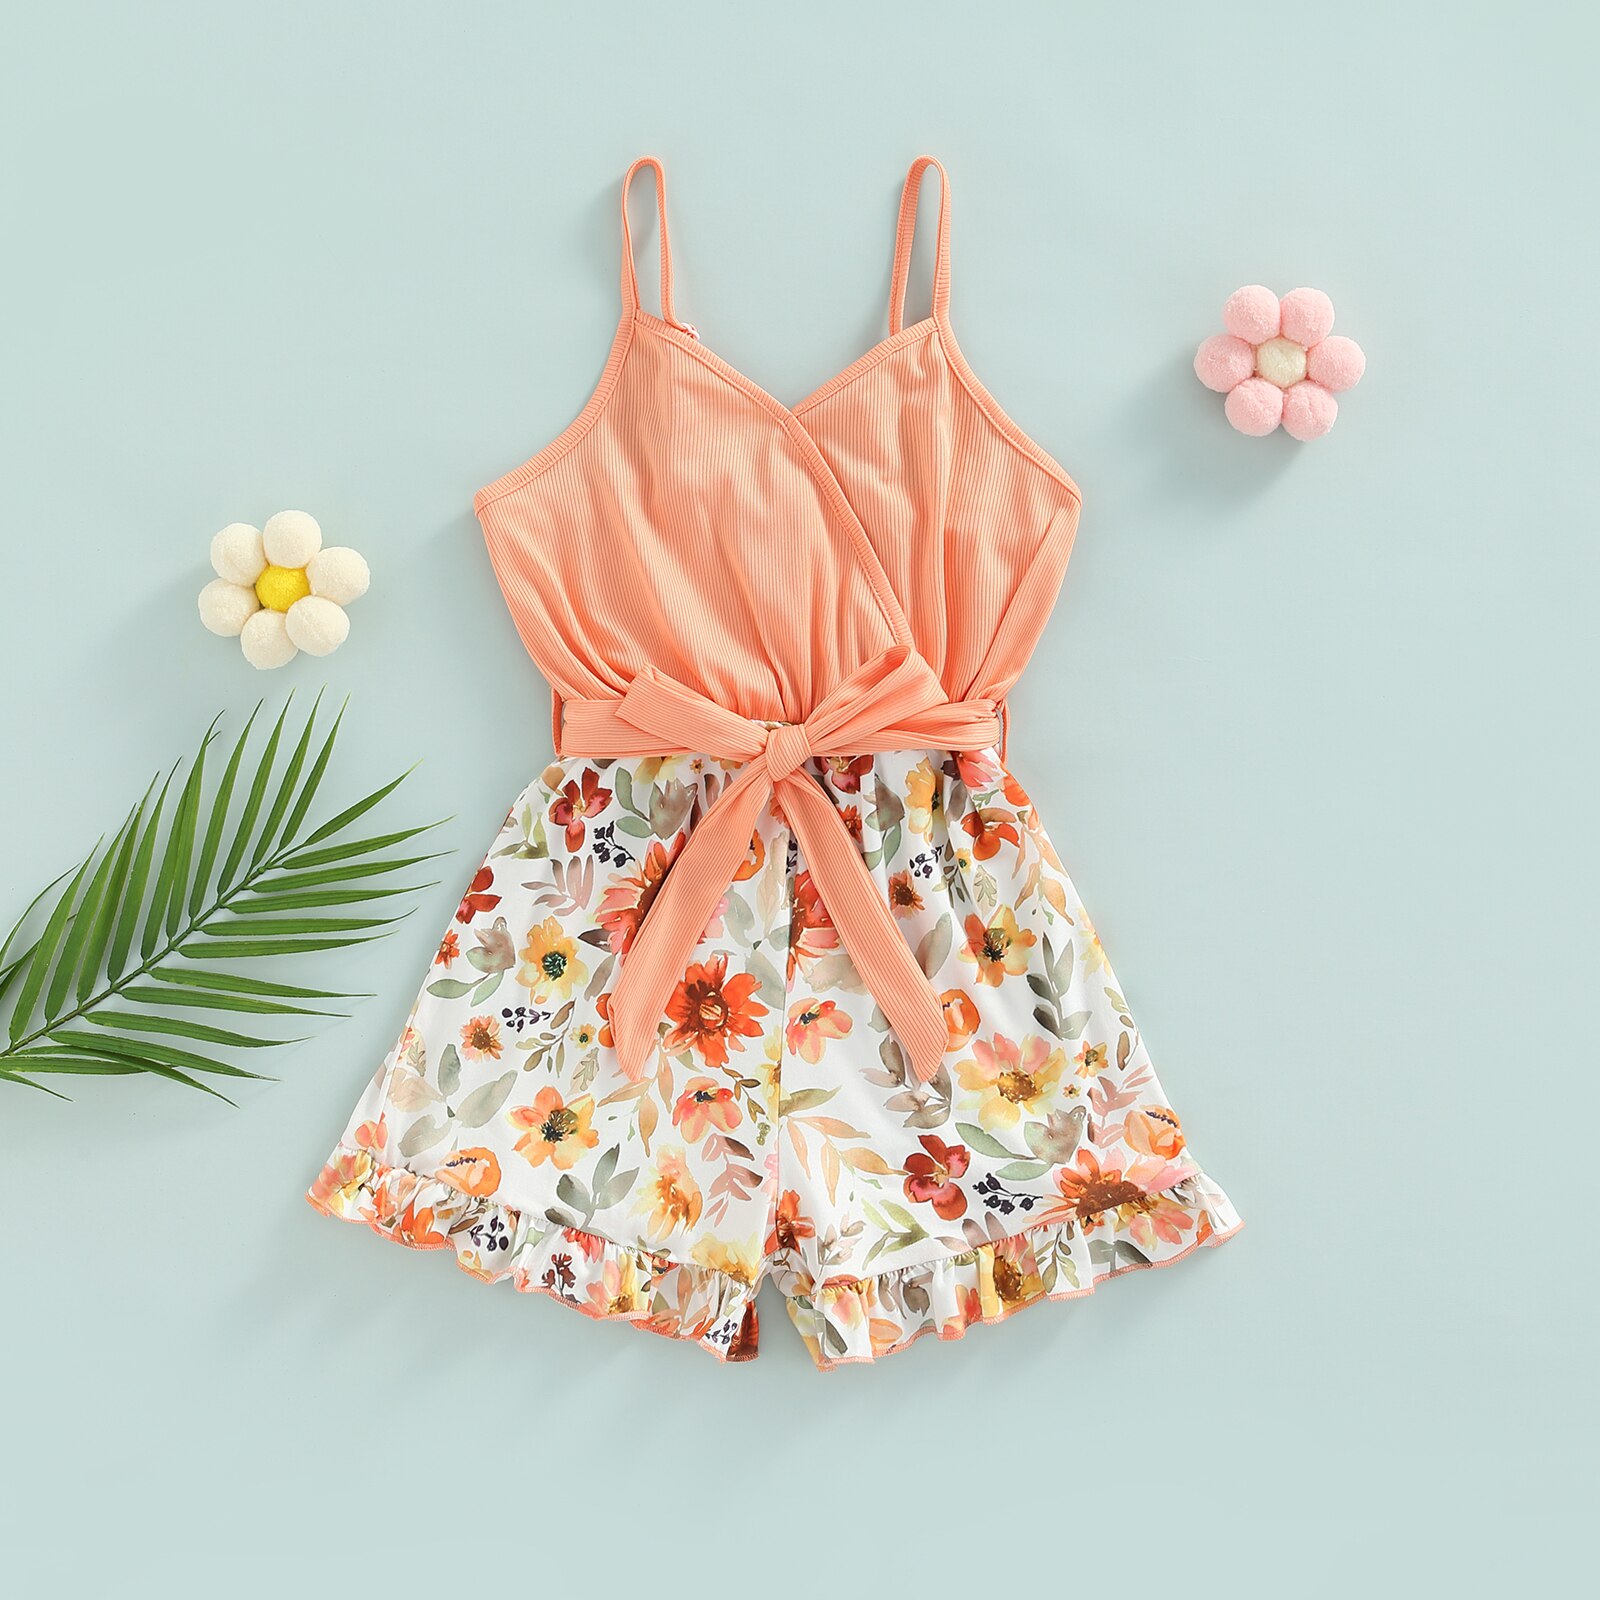 Kid-Baby-Girls-Summer-Short-Romper-Floral-Print-Sleeveless-Ruffled-Wide-Leg-Jumpsuit-Clothes-with-Belt-3